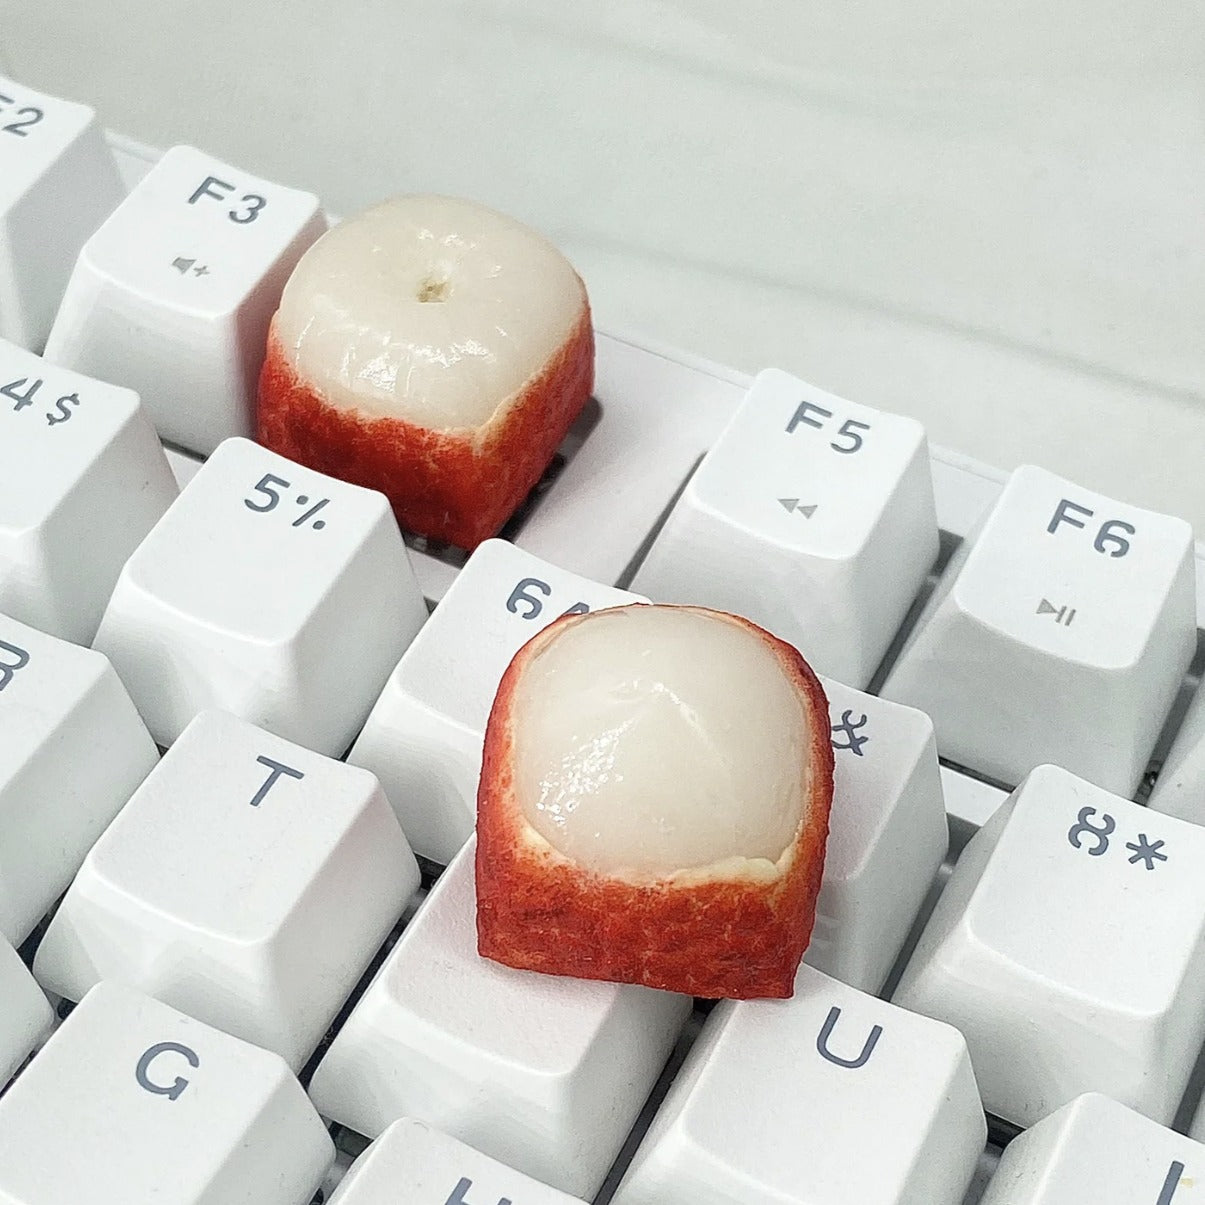 Lychee Craftsman Artisan Keycaps - with True-to-Life Flesh and Peel Shapes（Pre Order）